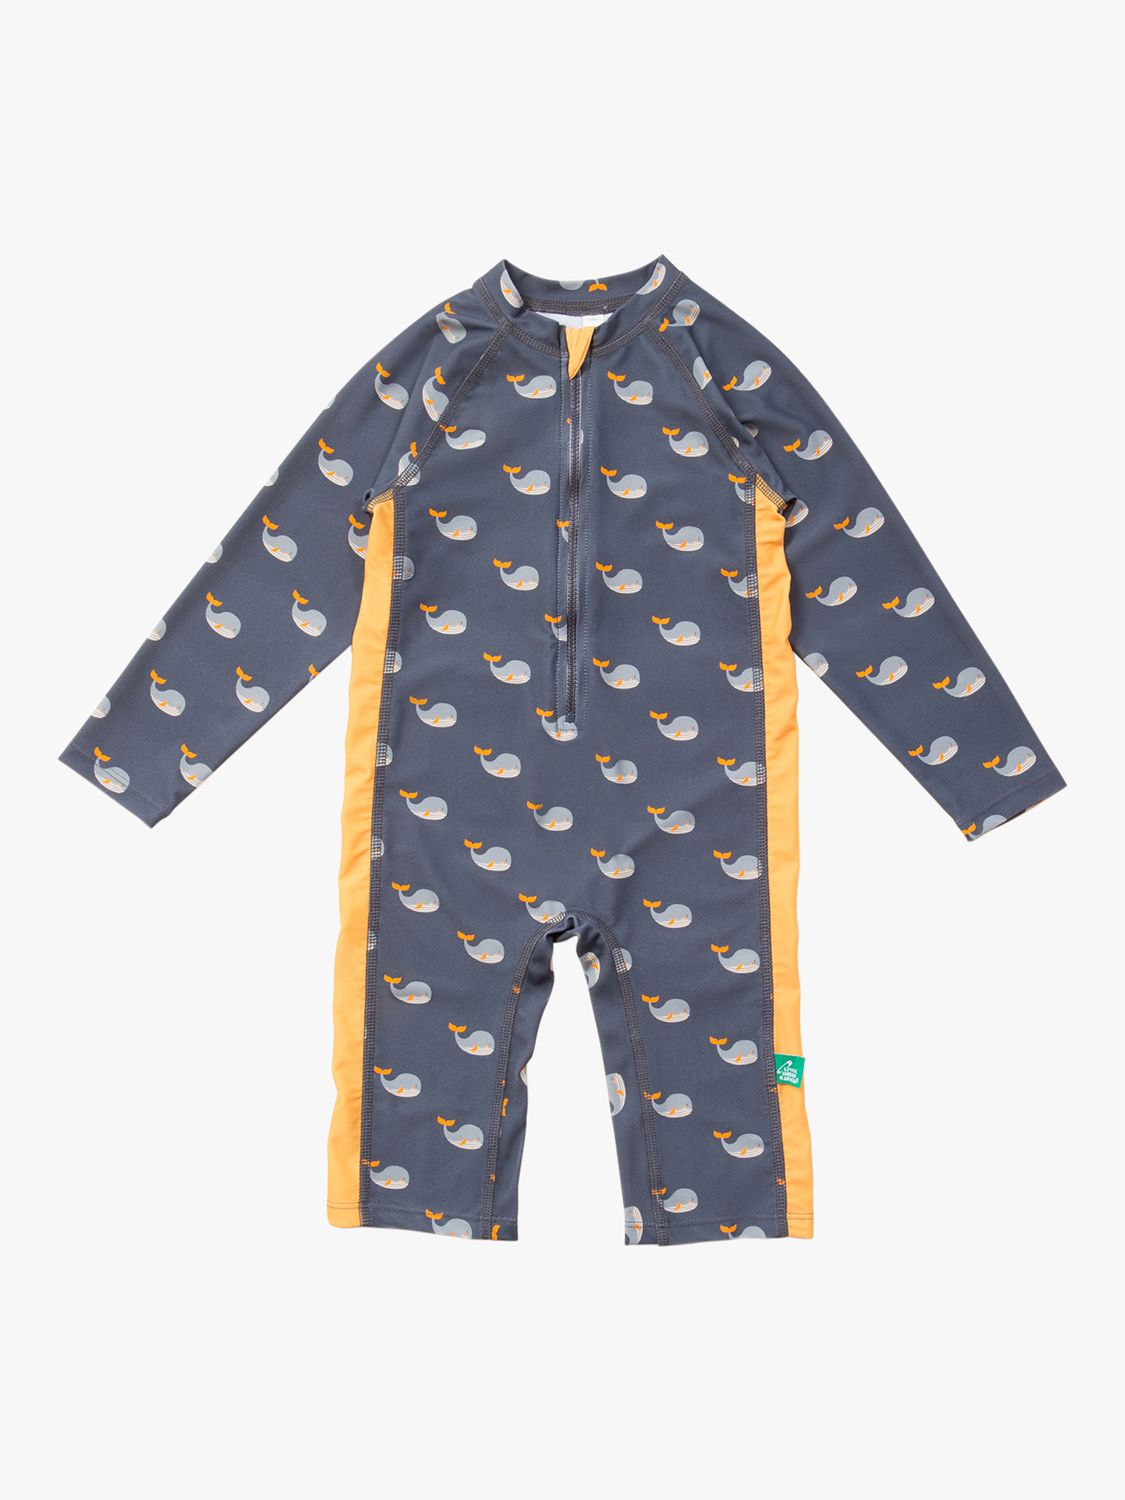 Little Green Radicals Baby Recycled Whale Song Print Sunsuit, Grey/Multi, 0-6 months